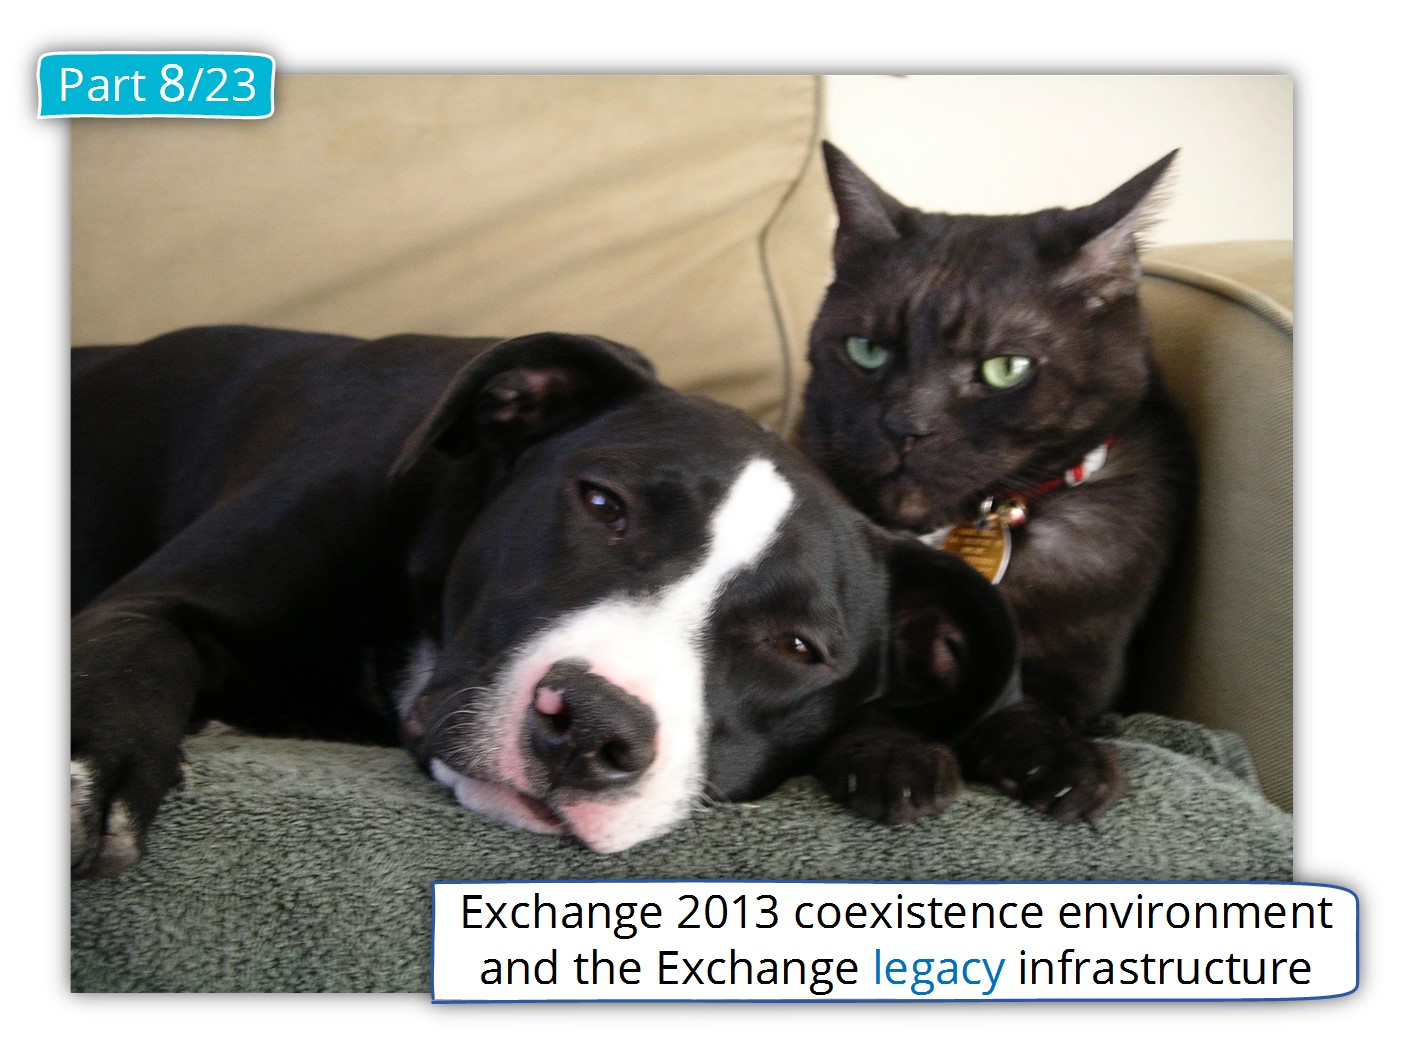 Exchange 2013 coexistence environment and the Exchange legacy infrastructure